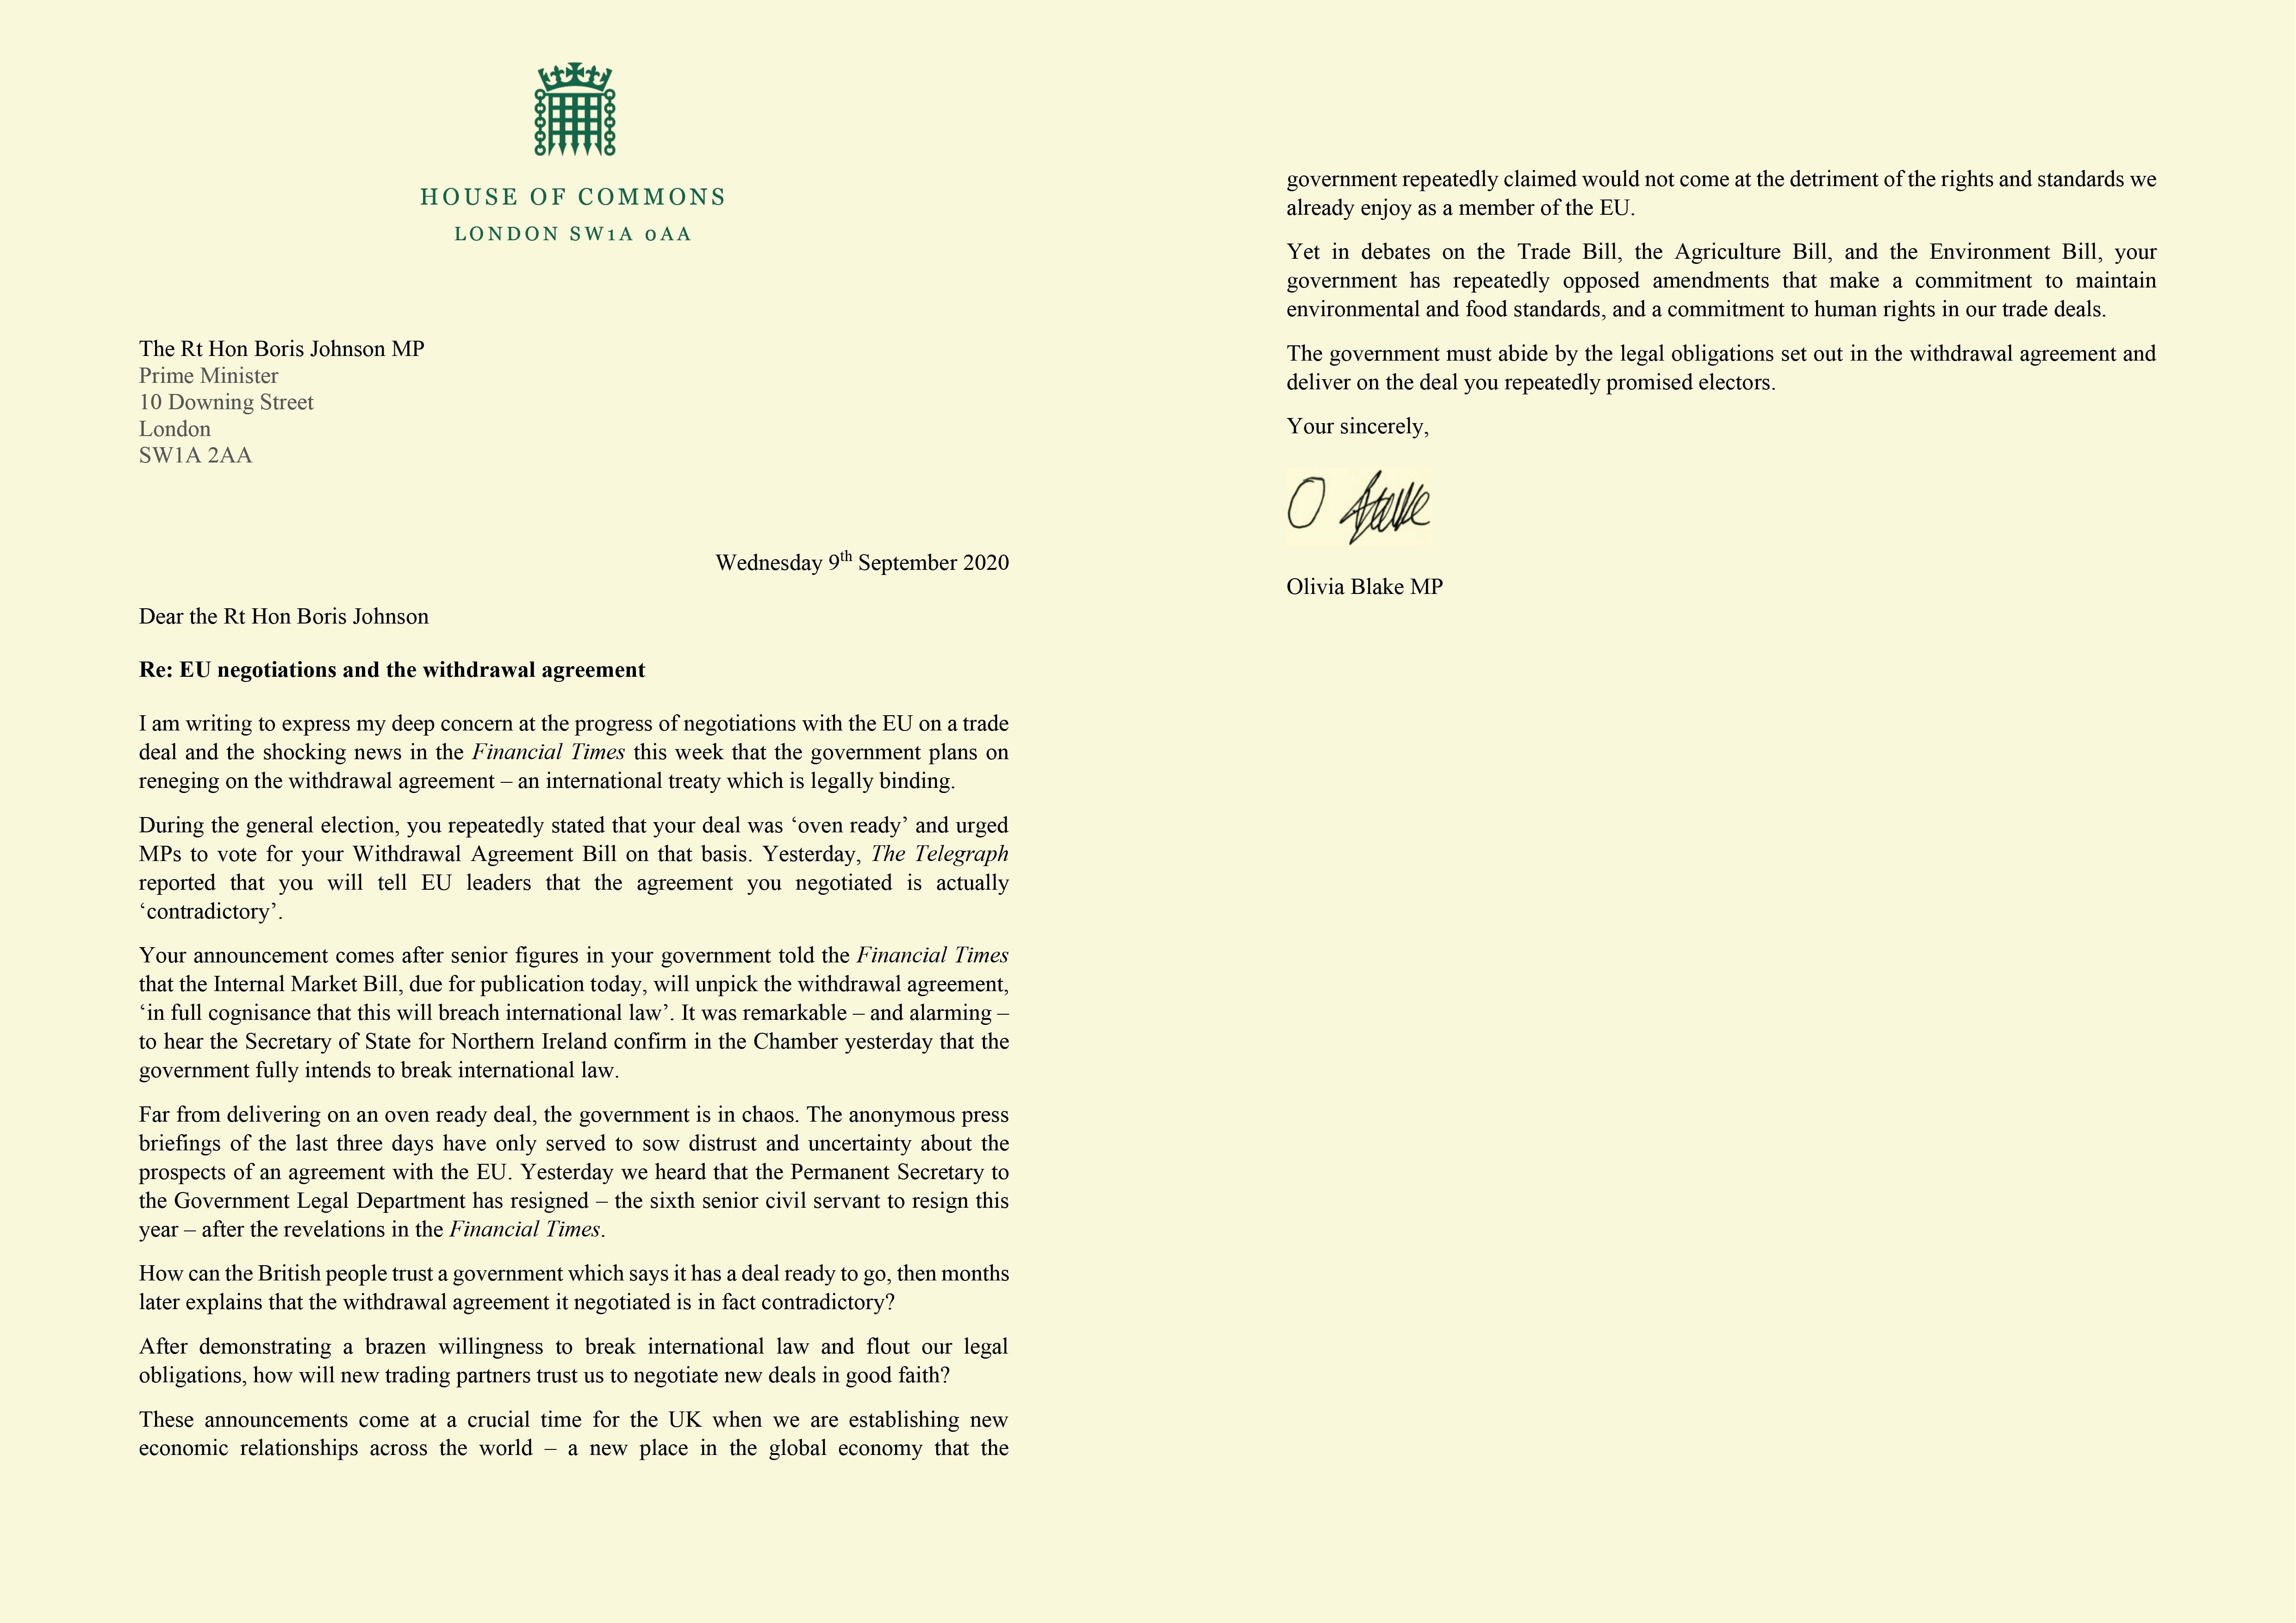 A letter addressed to Boris Johnson asking how can our future trading partners trust a government which is so brazenly asking parliament to break international law.